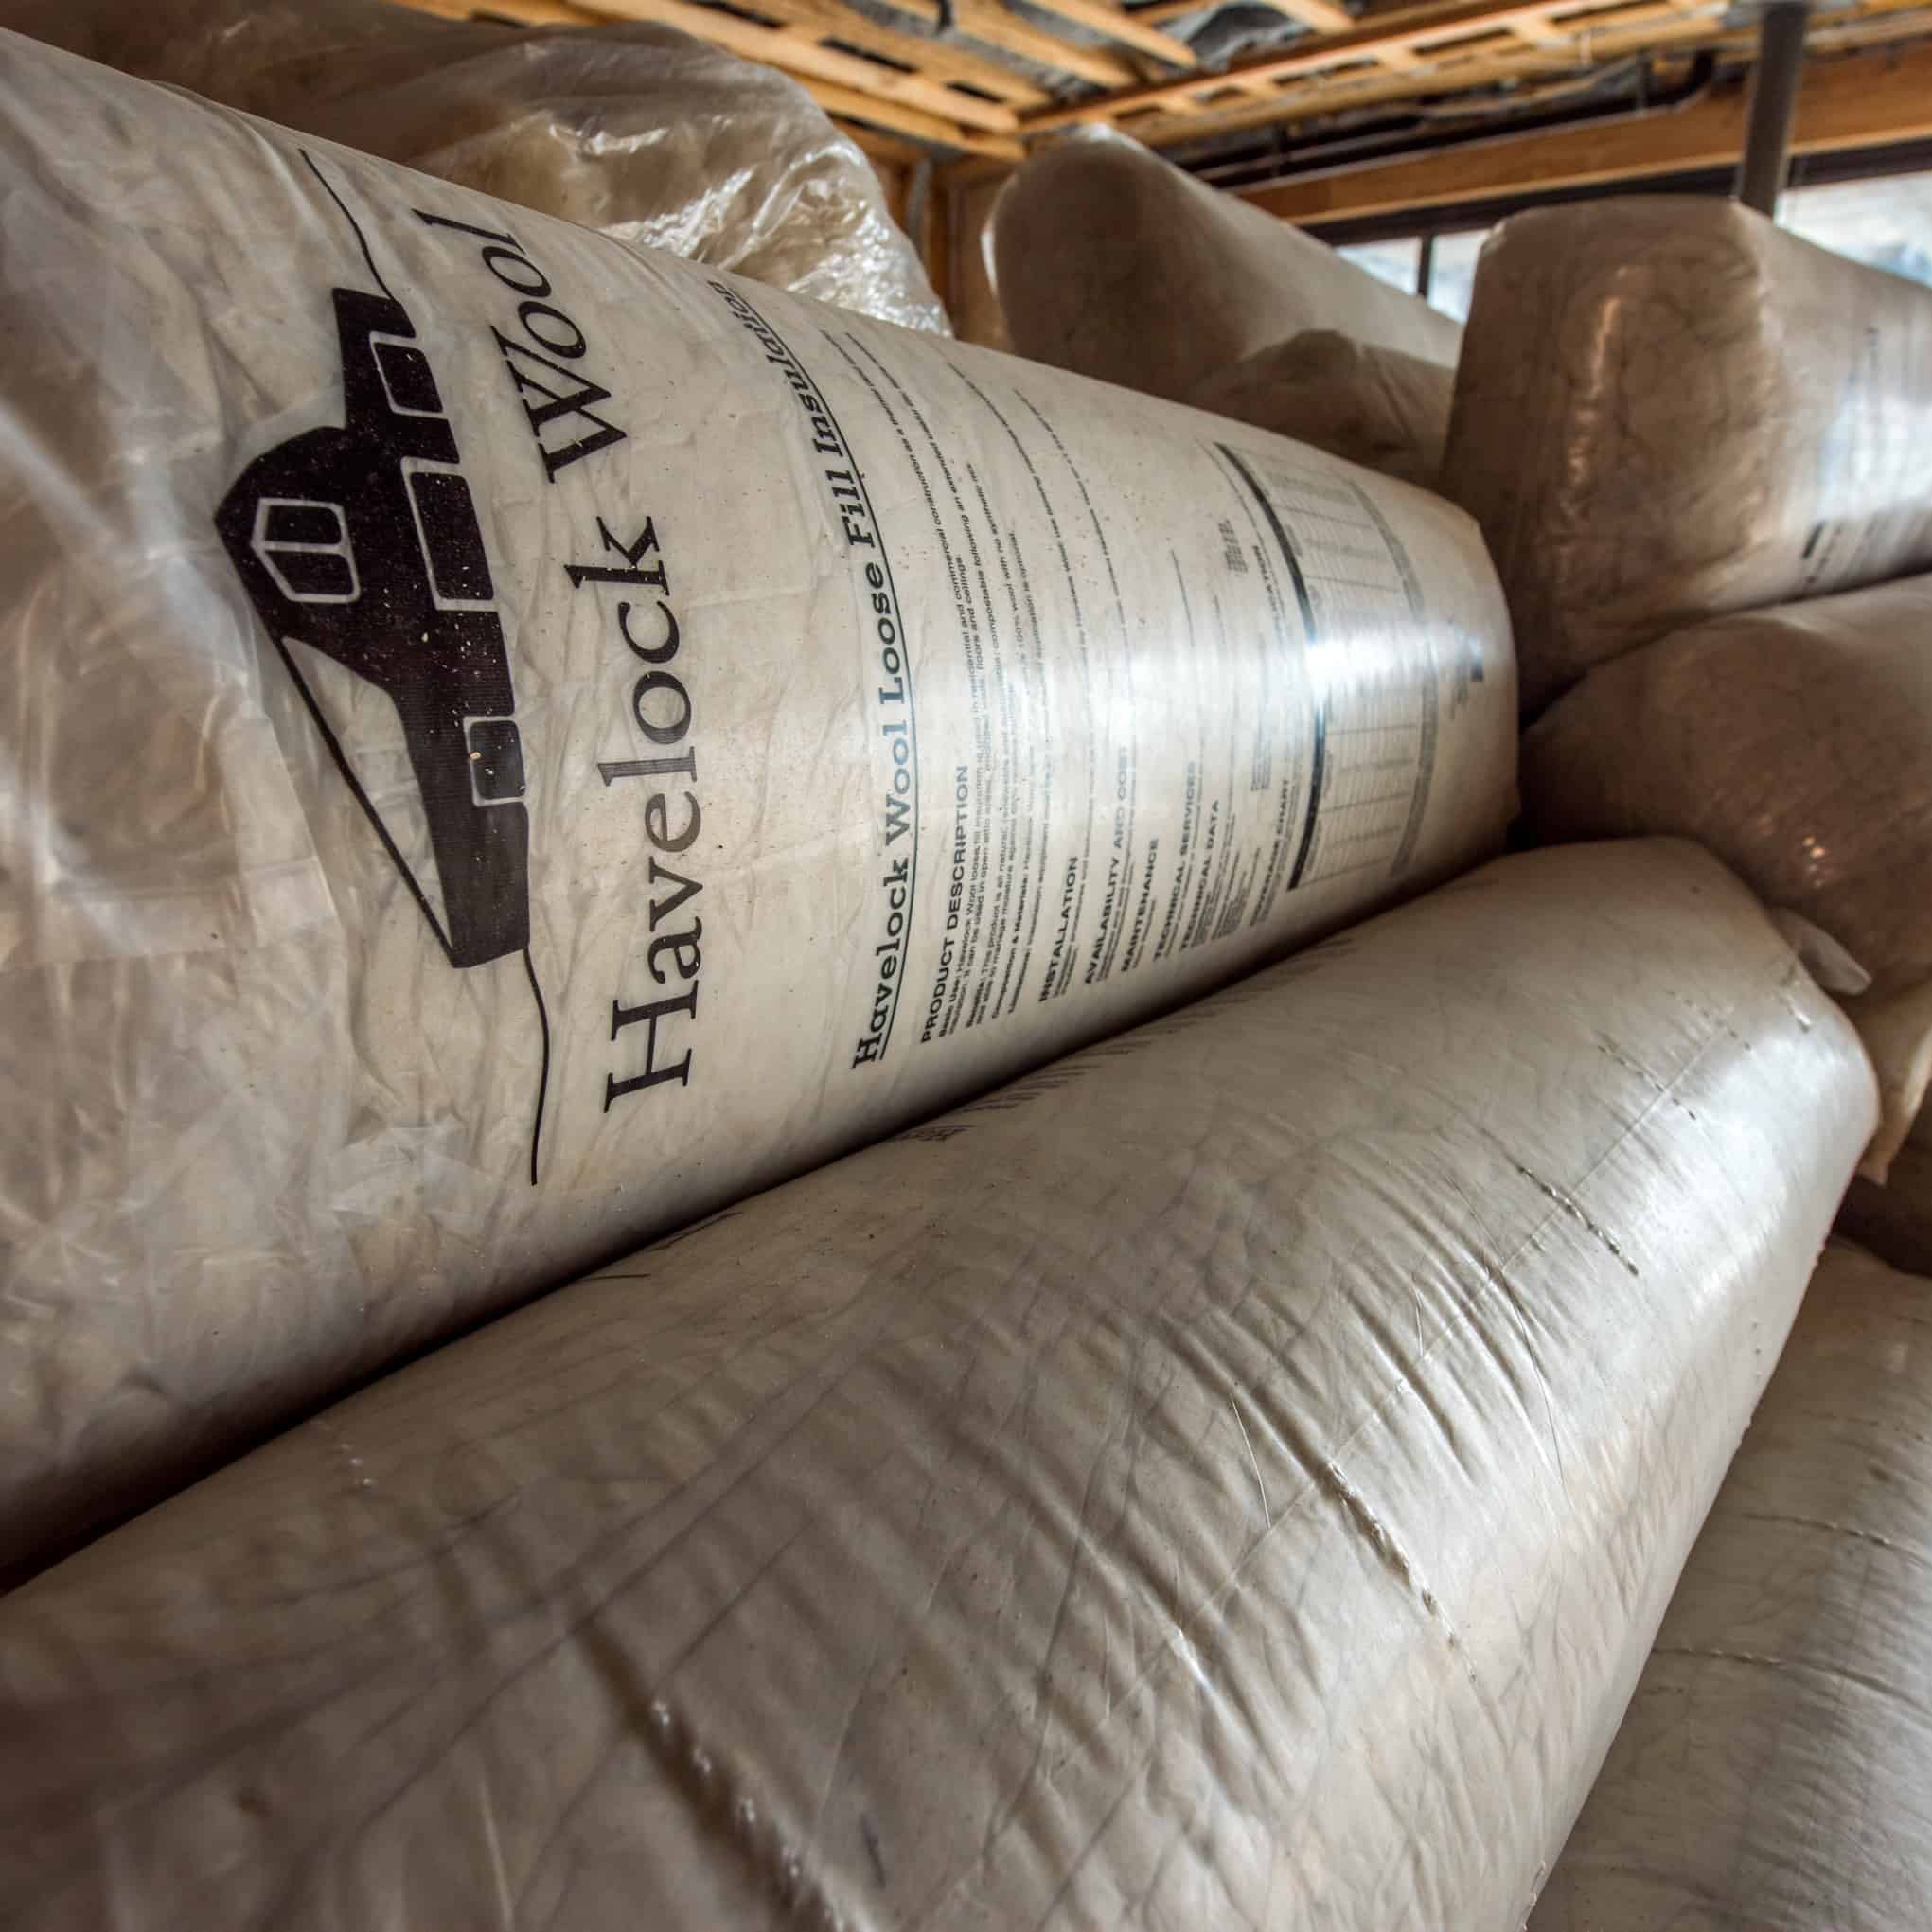 Havelock Wool loose-fill insulation comes compressed in bags for easy handling.